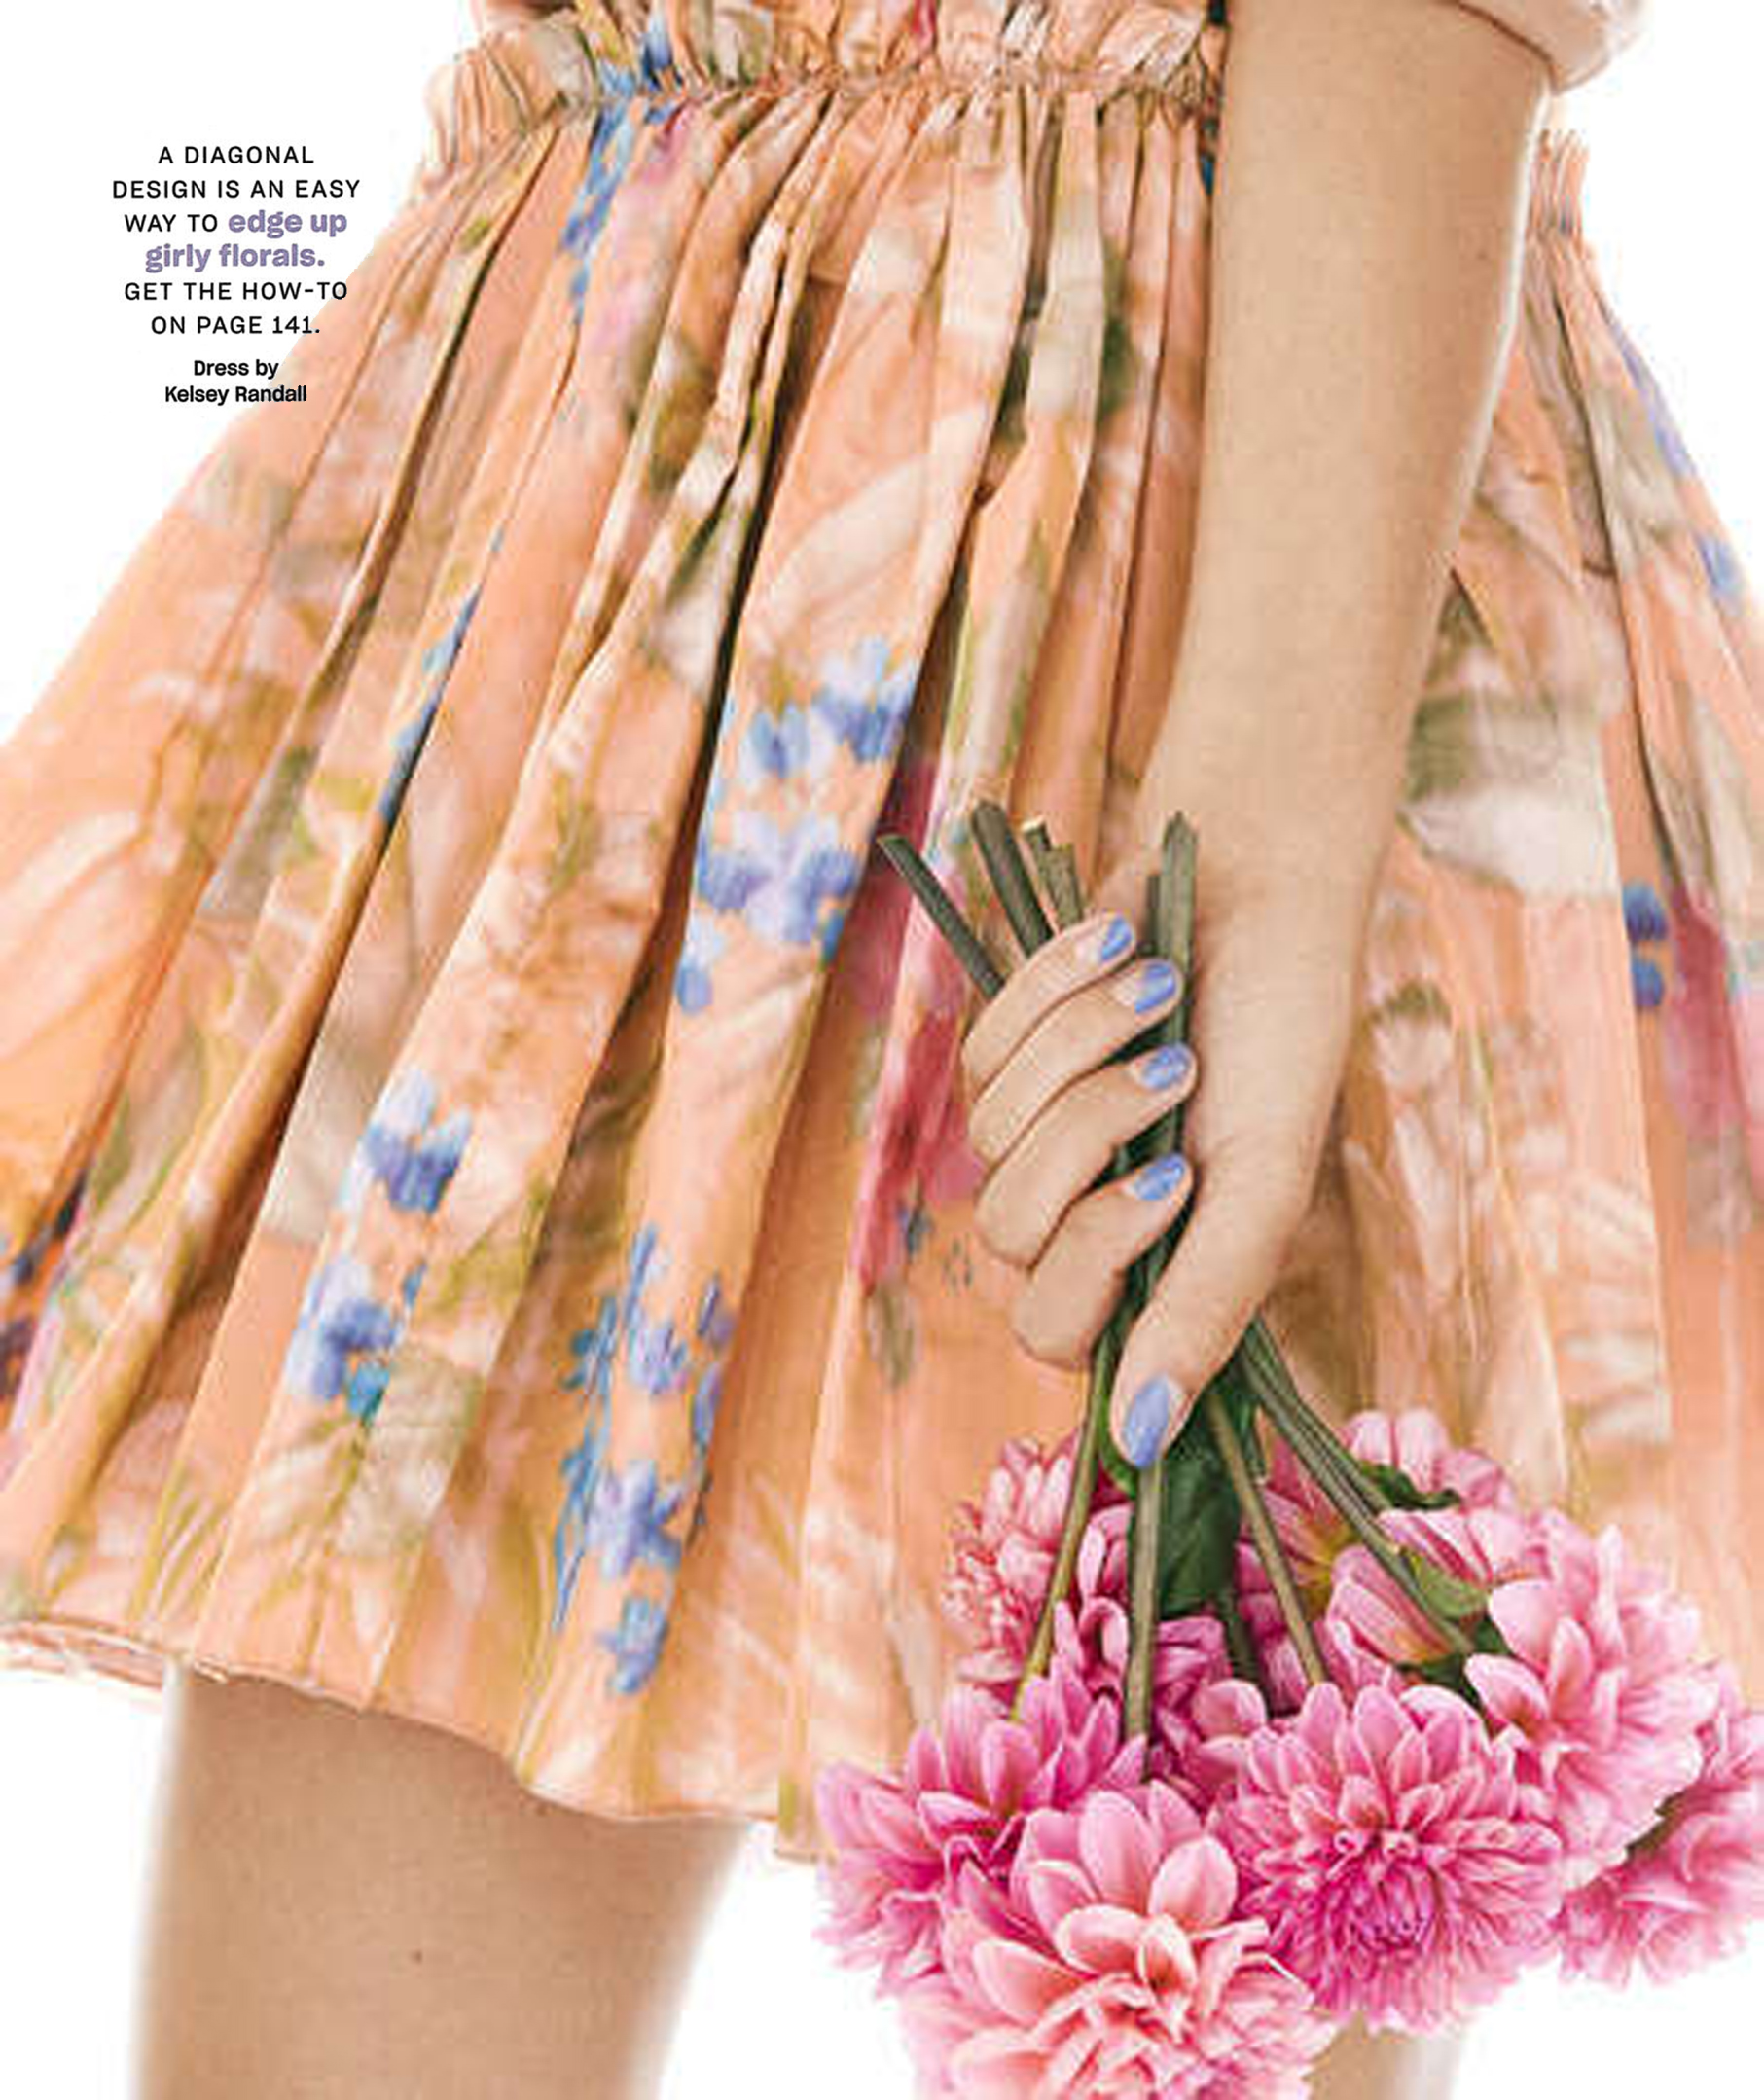 Copy of real simple magazine kelsey randall nail beauty tutorial fashion spread